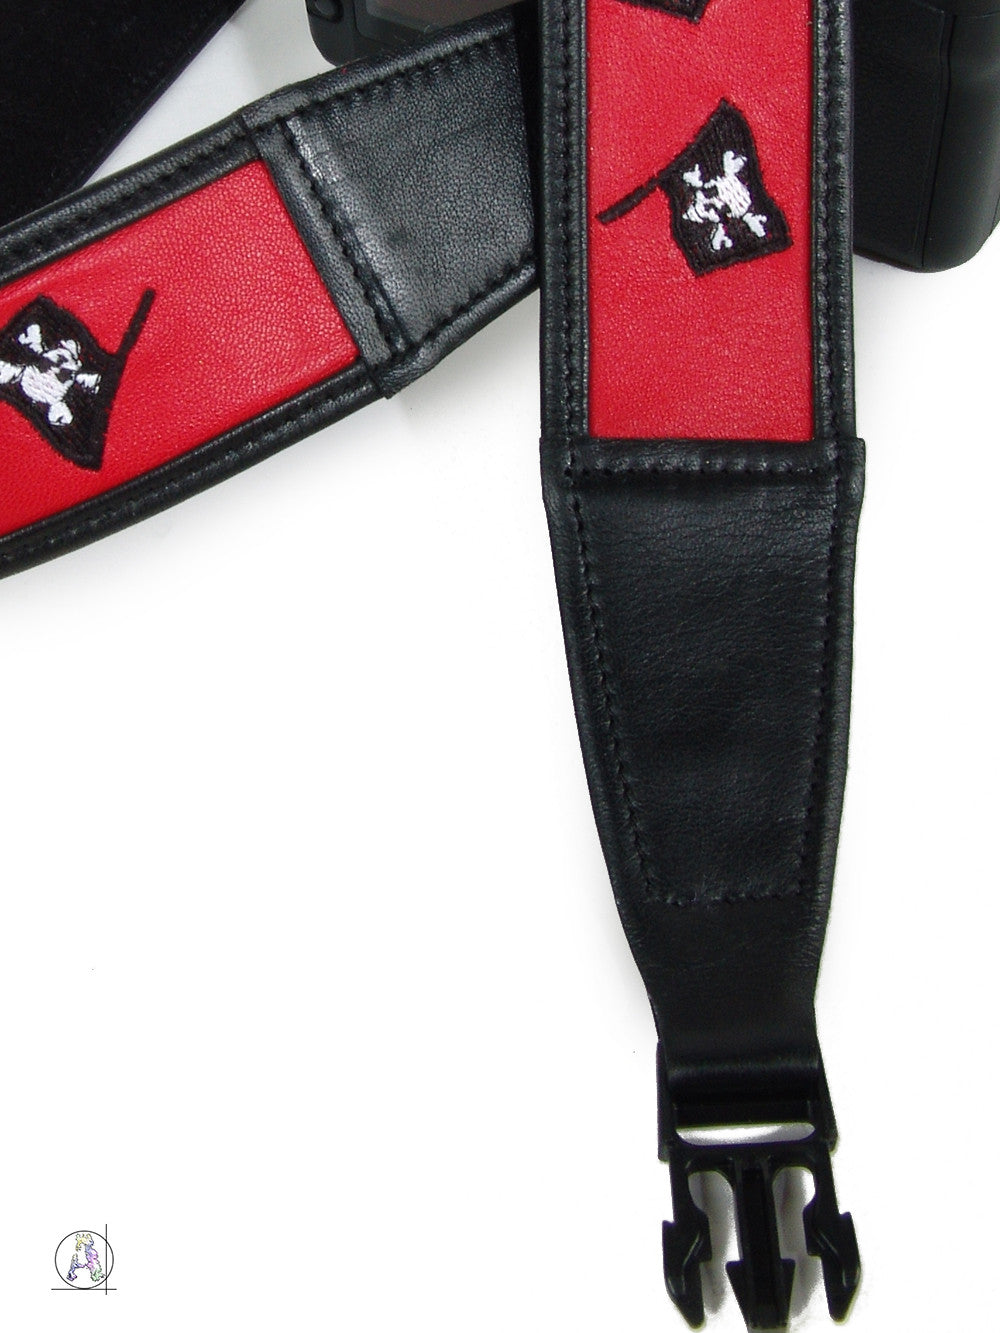 Embroidered Parrothead "Pirate" Leather Camera Strap